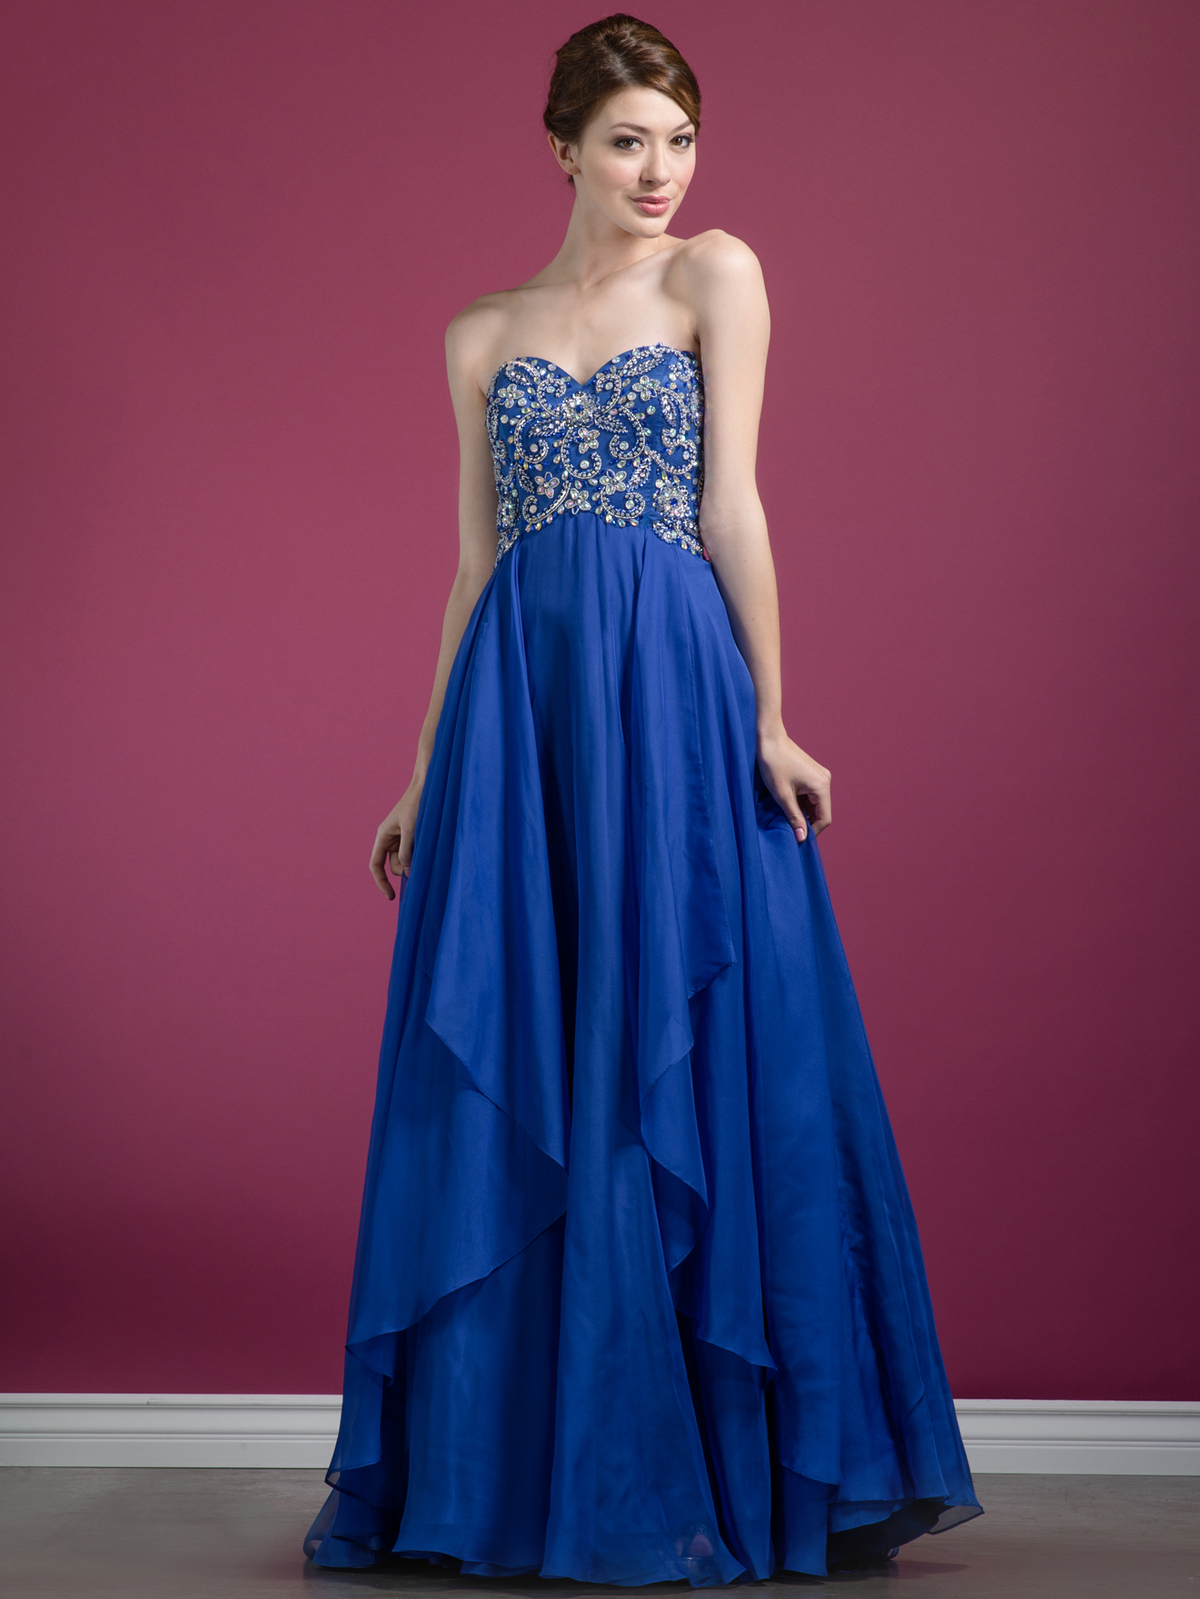 Wholesale Prom Dresses In Los Angeles - Prom Dresses Cheap